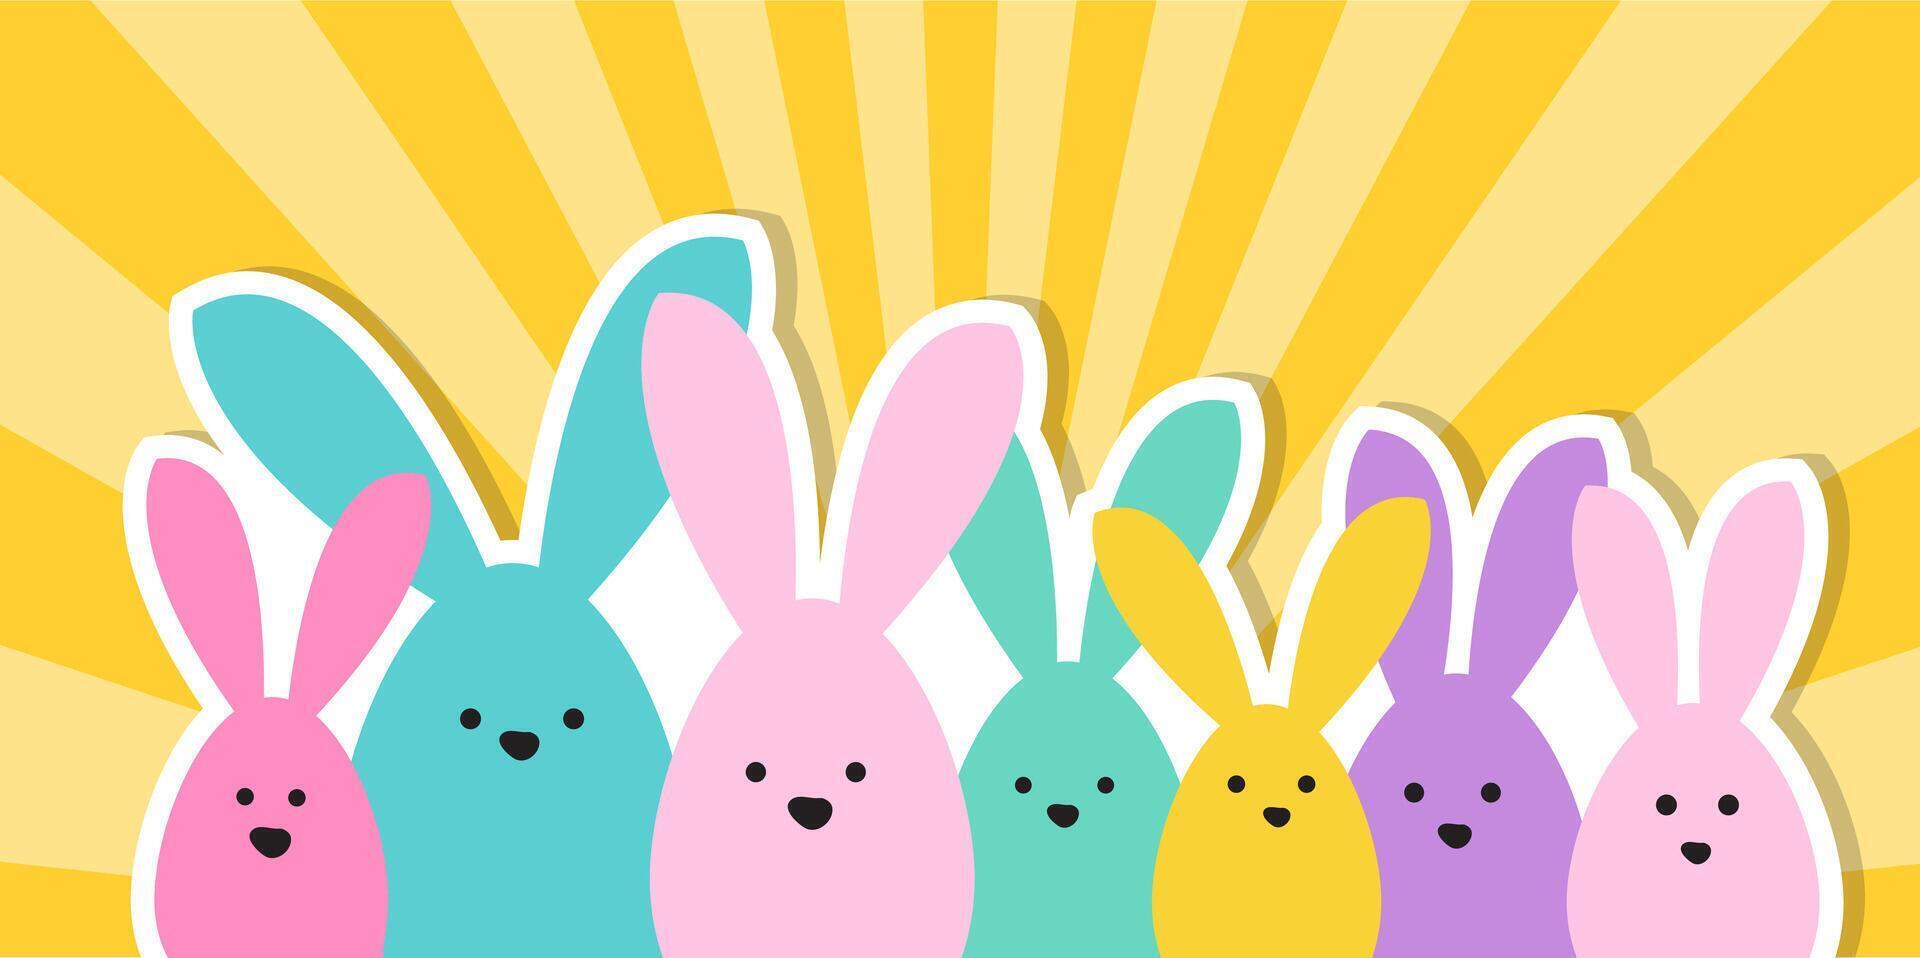 Celebration Greeting Easter card, colorful easter bunny family on sunbeam background vector